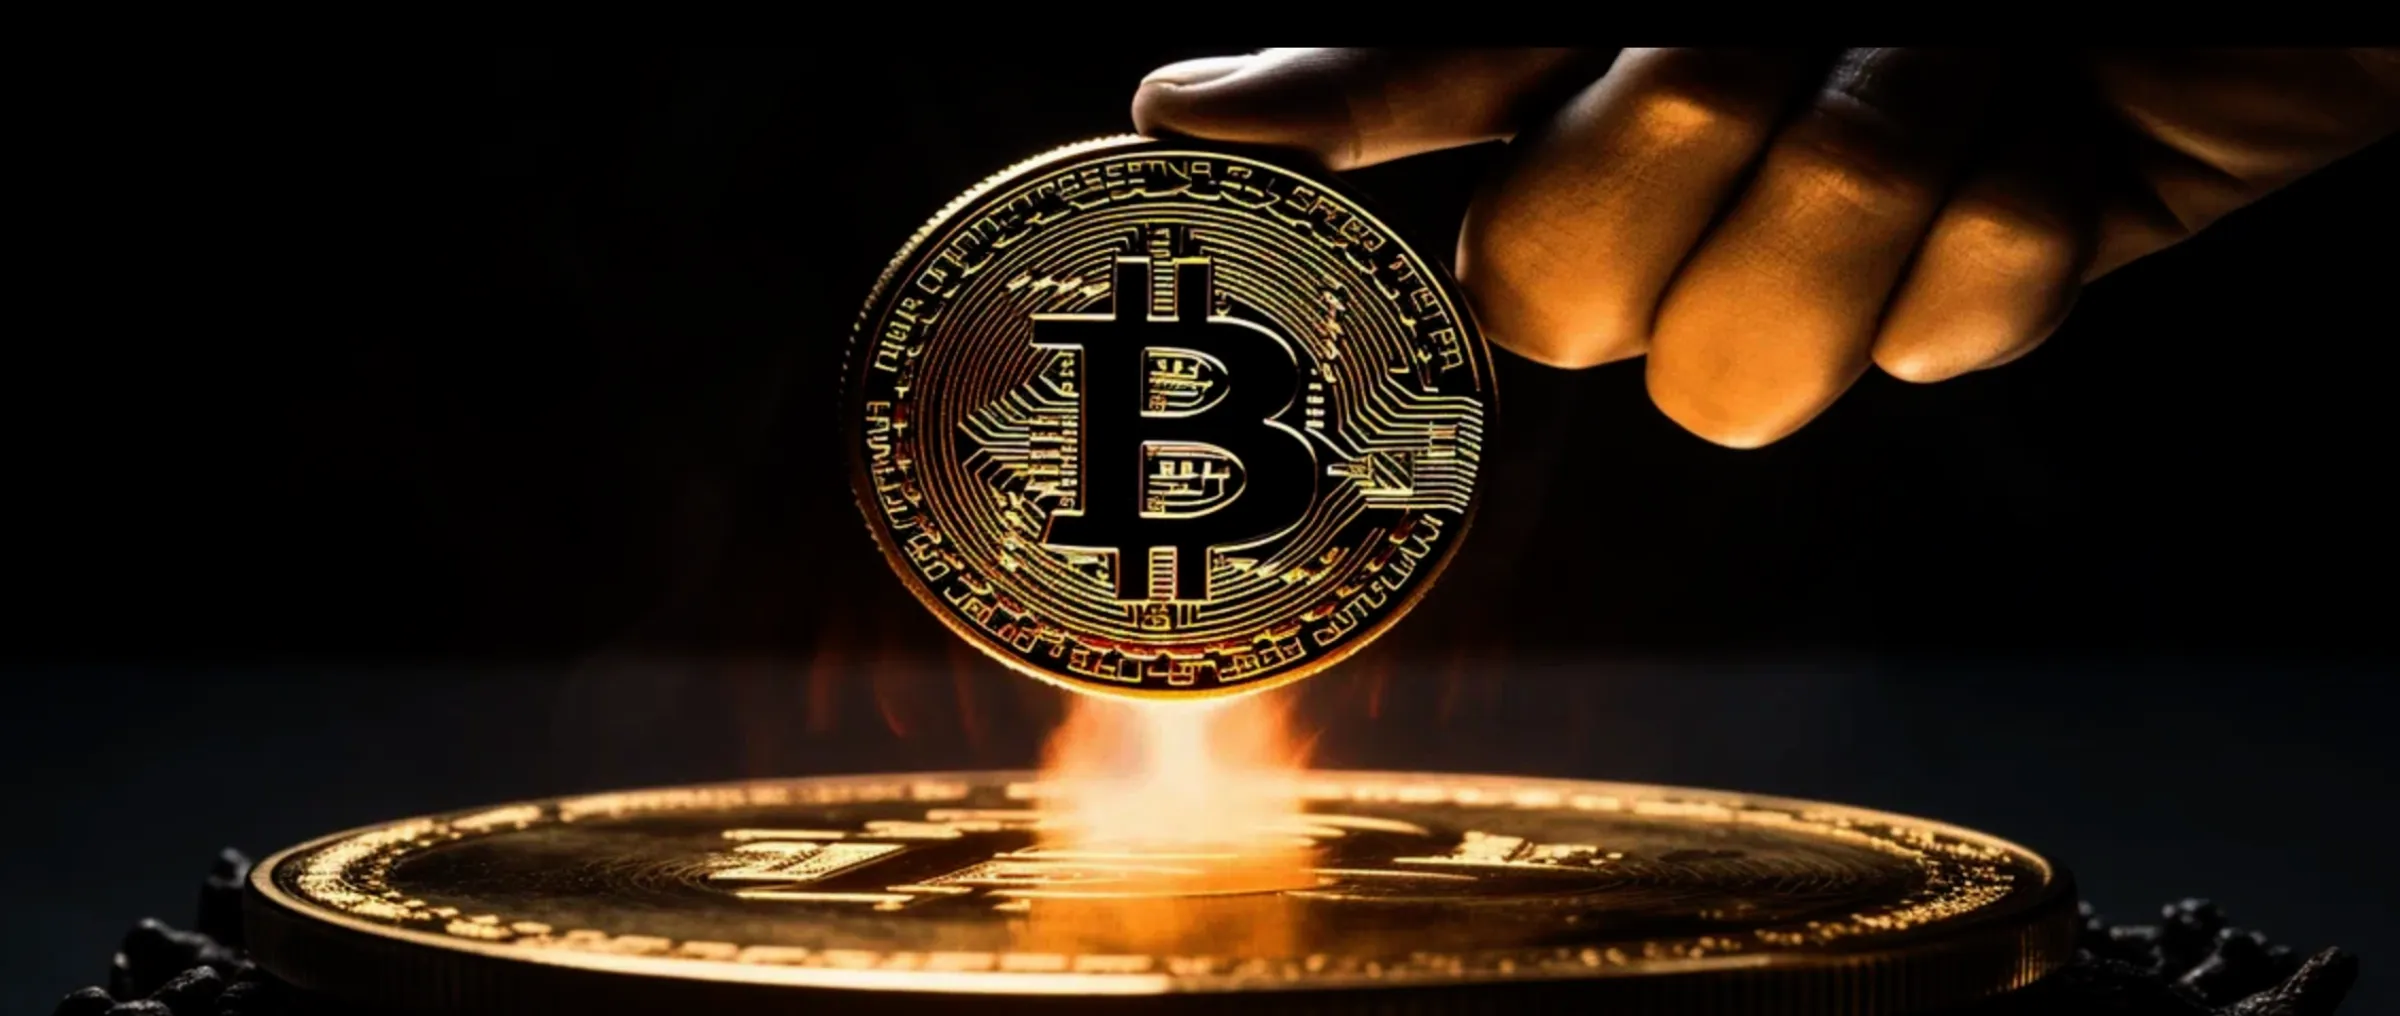 The analyst suggested that by the end of the year, the value of bitcoin could reach $100 thousand